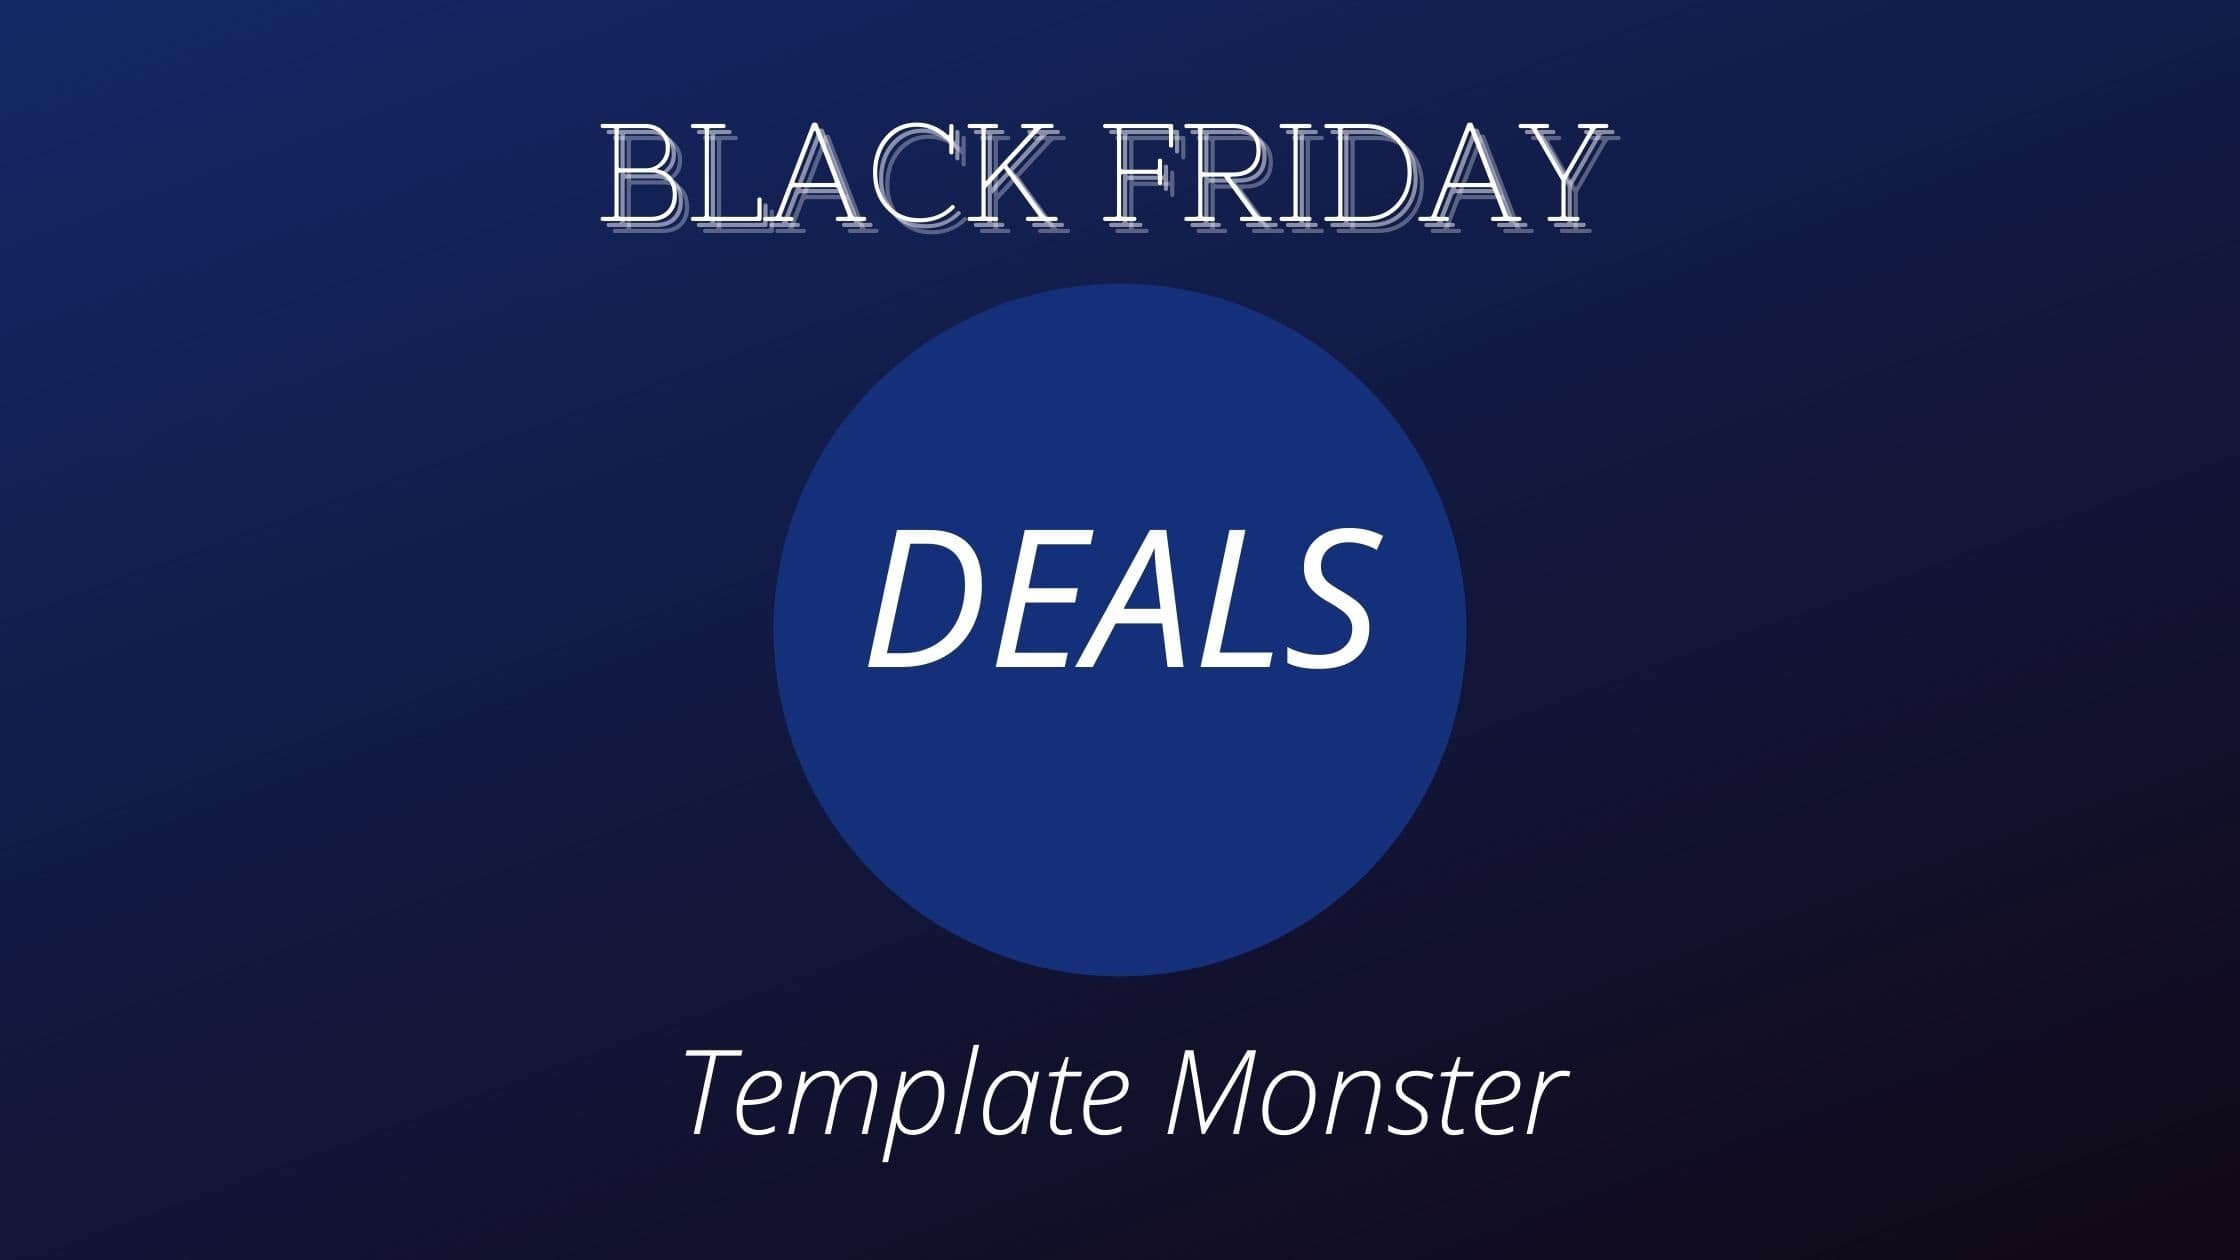 Template Monster Black Friday Deals 2021- Get Up To 50% Off image